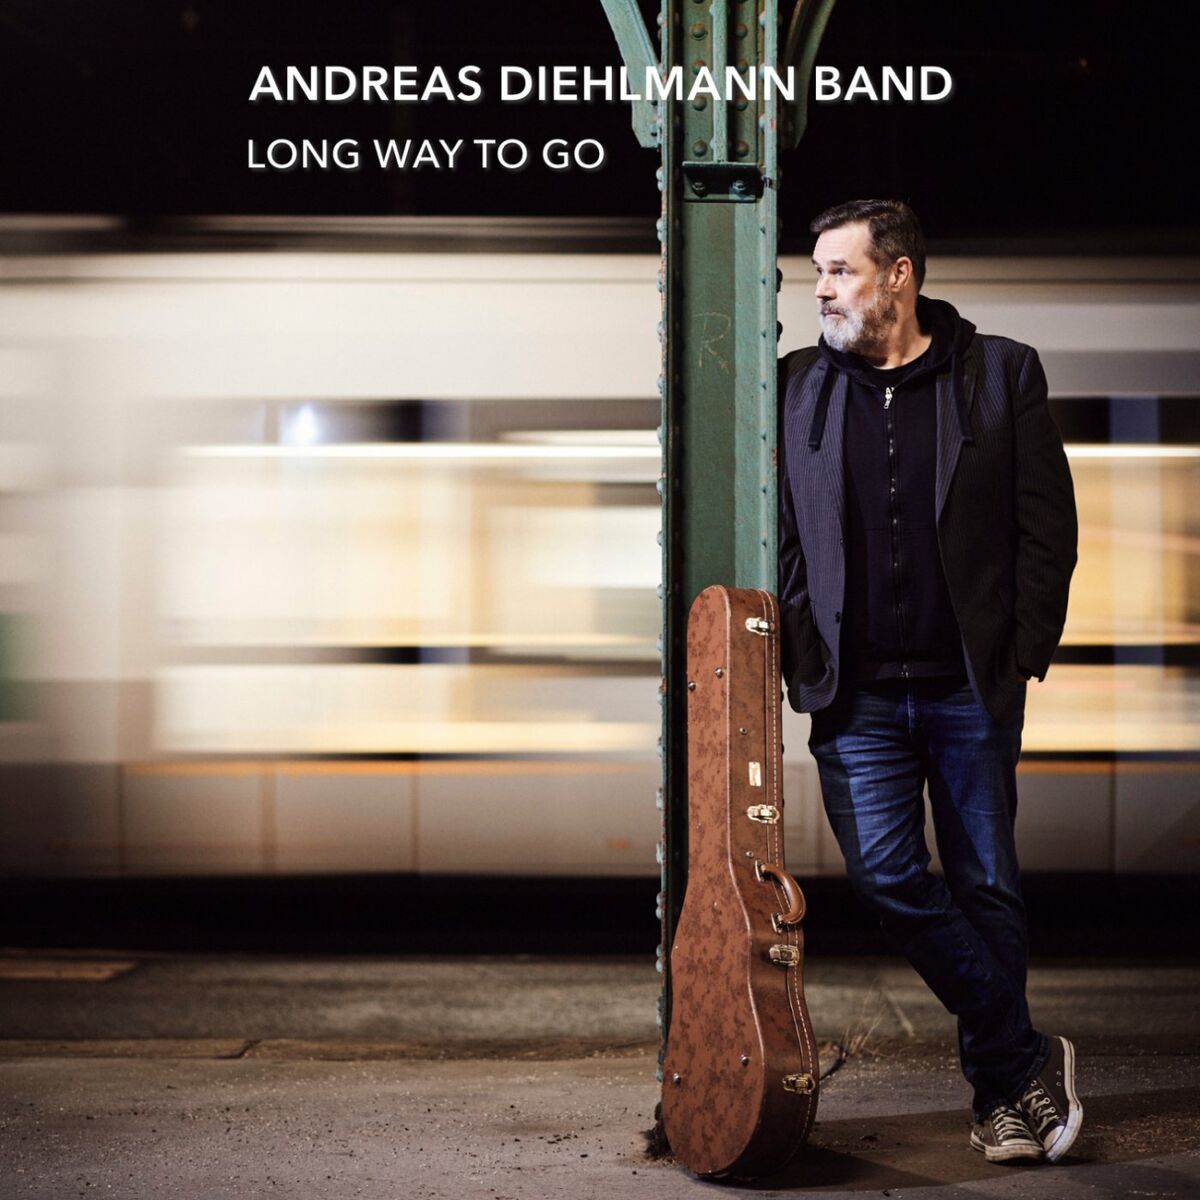 Andreas Diehlmann Band - Long Way To Go